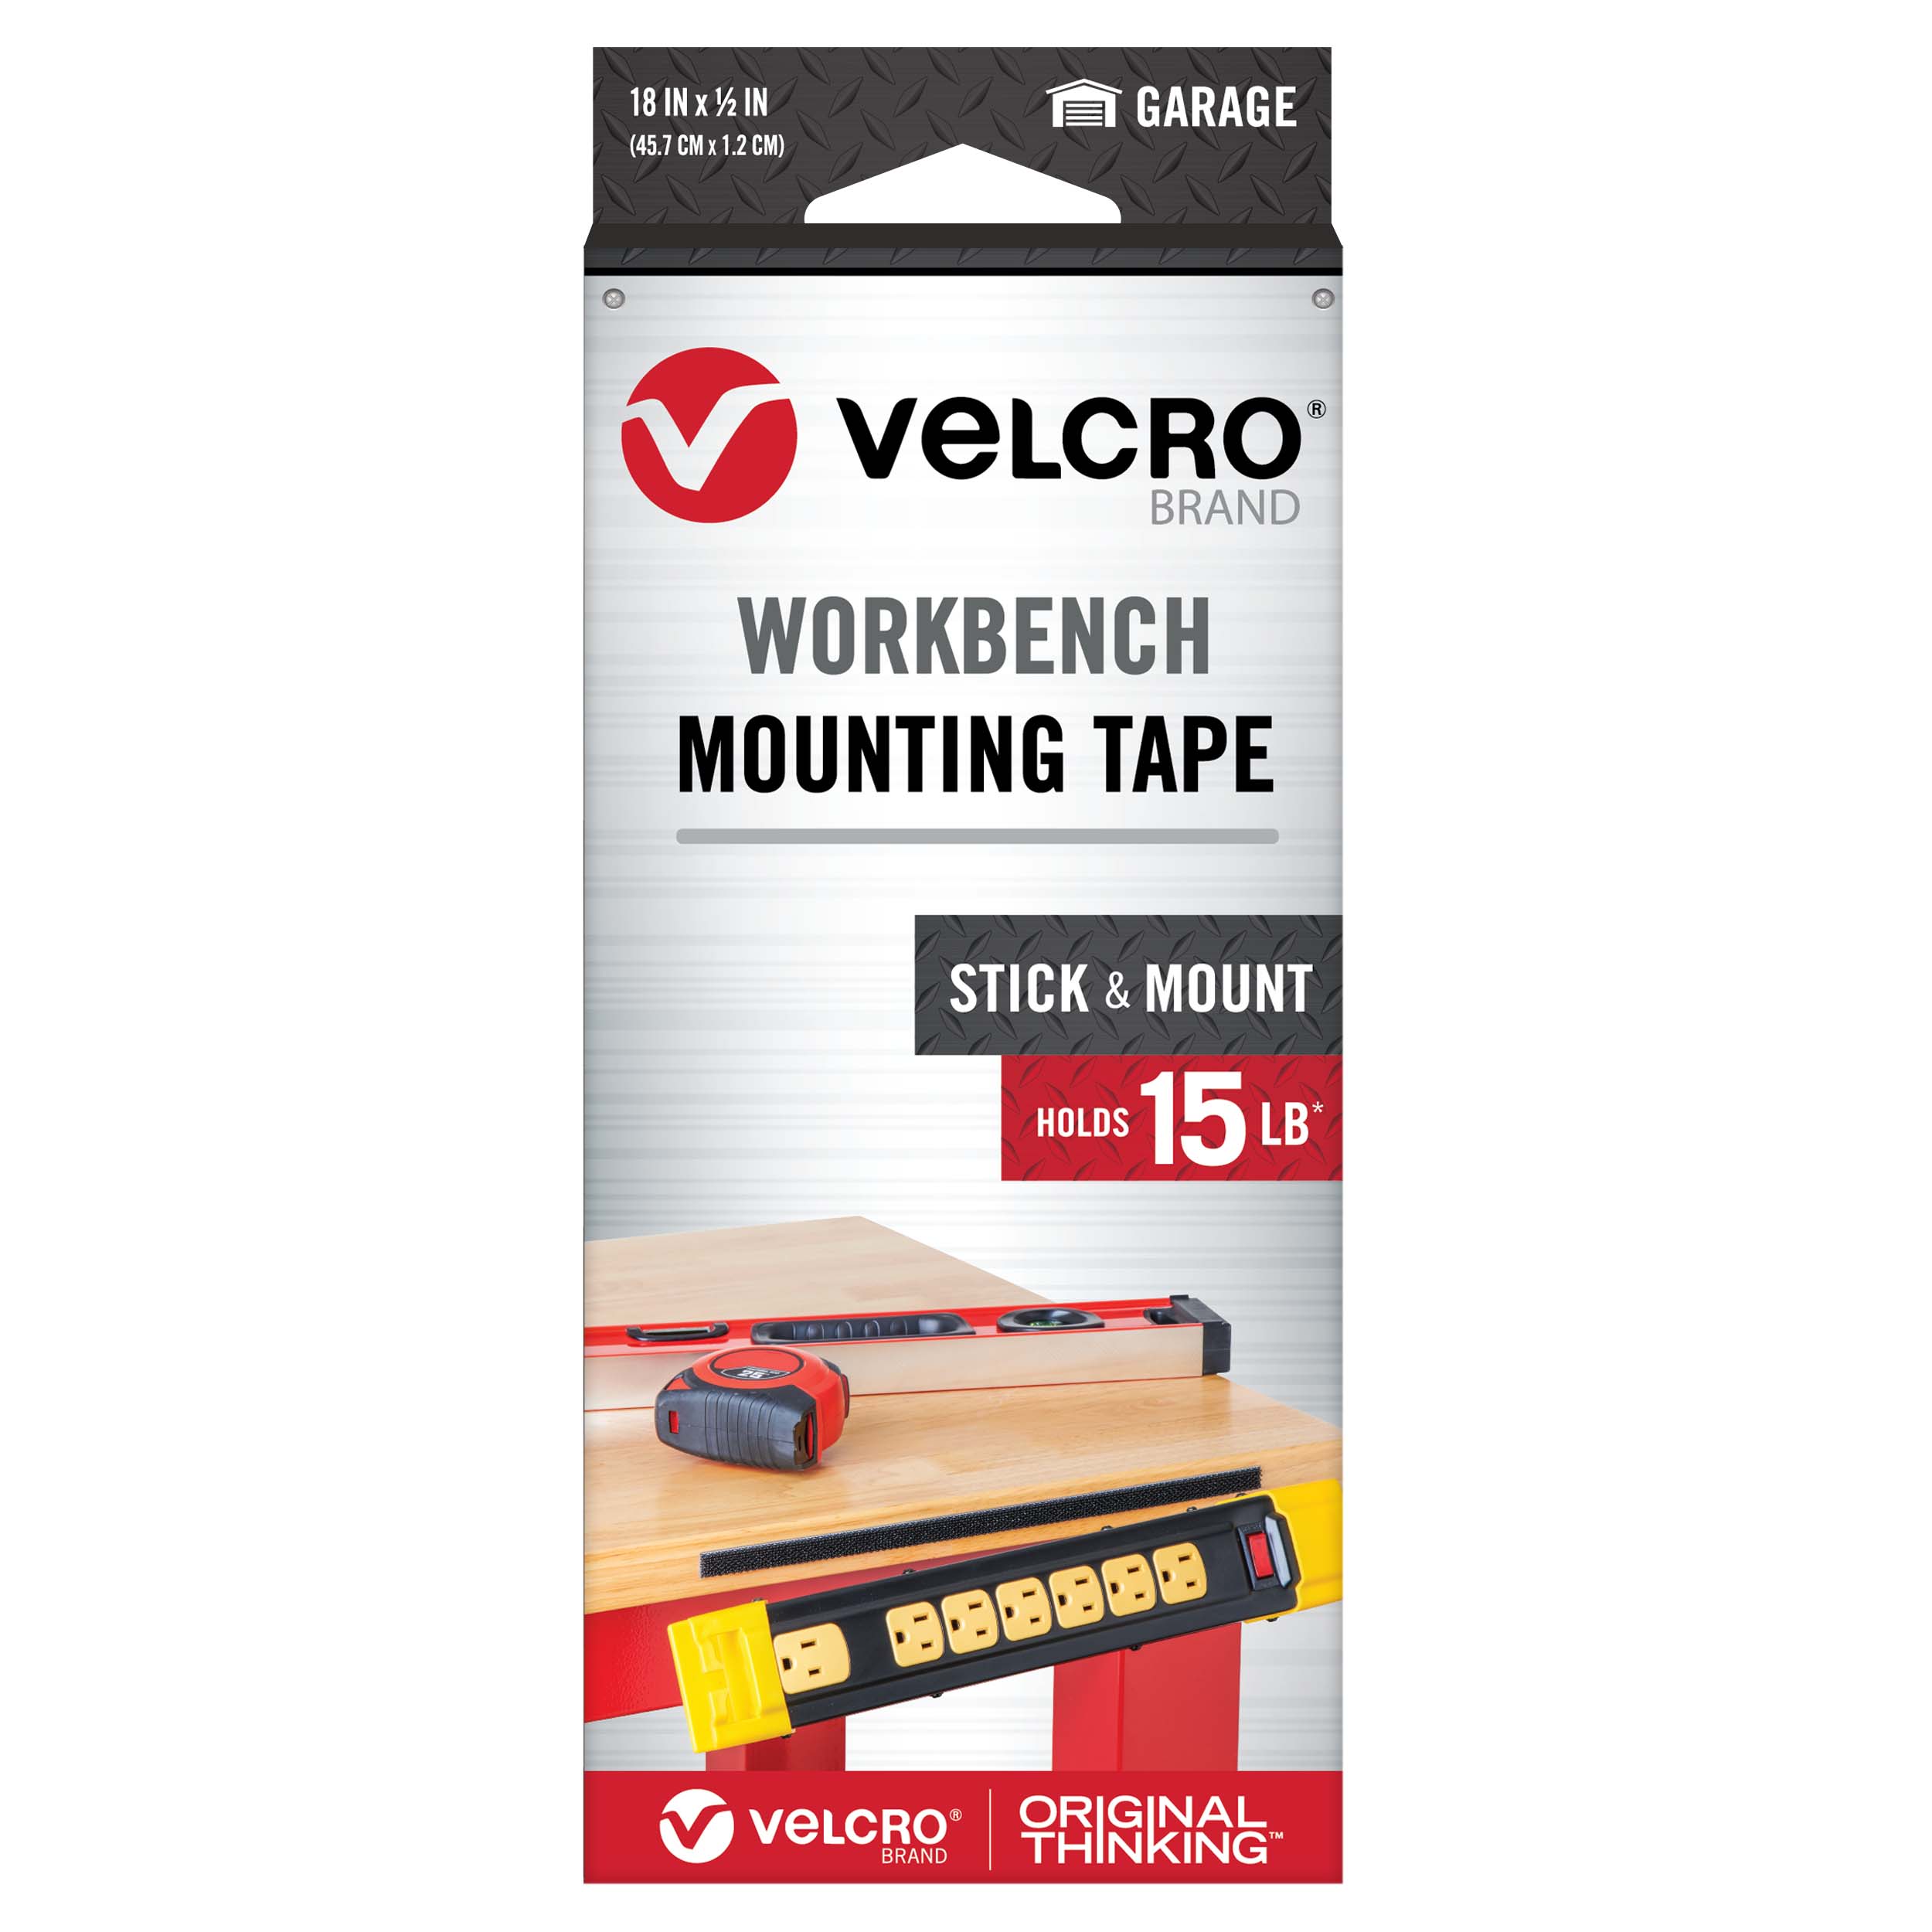 VELCRO Brand - Industrial Strength | Indoor & Outdoor Use | Superior  Holding Power on Smooth Surfaces | Size 4ft x 2in | Tape, White - Pack of 1